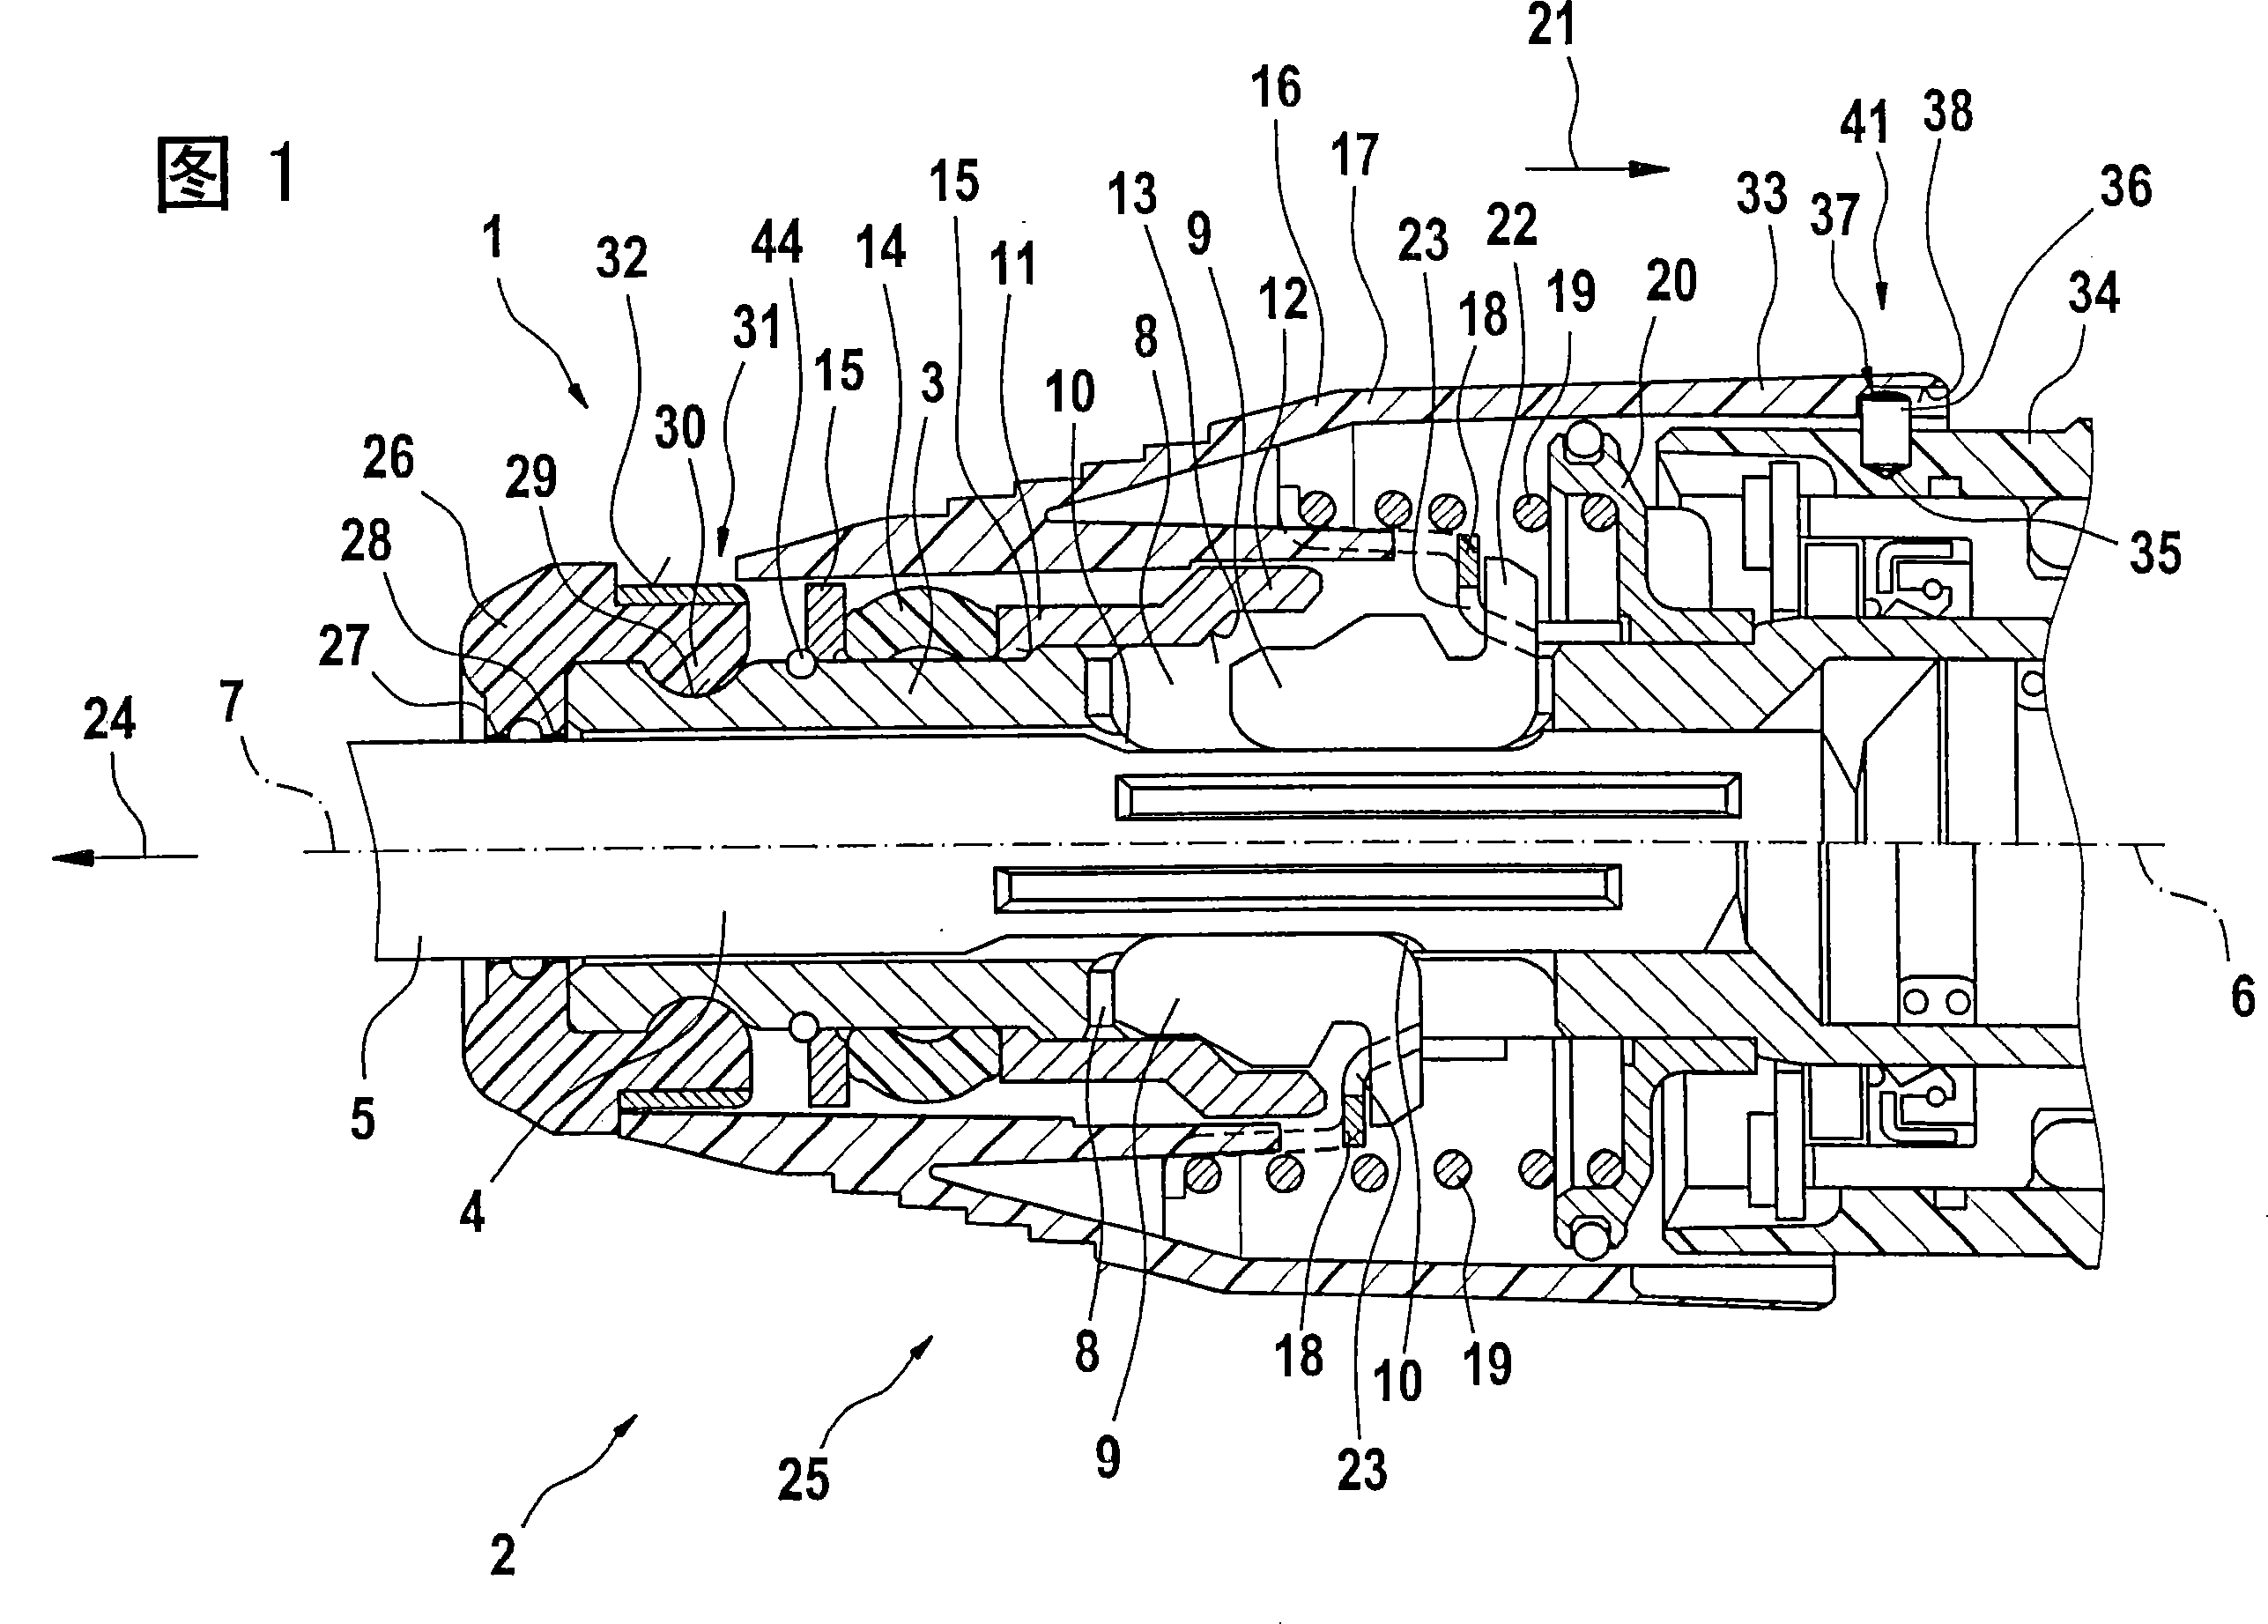 Electric hand tool machine having a tool locking system